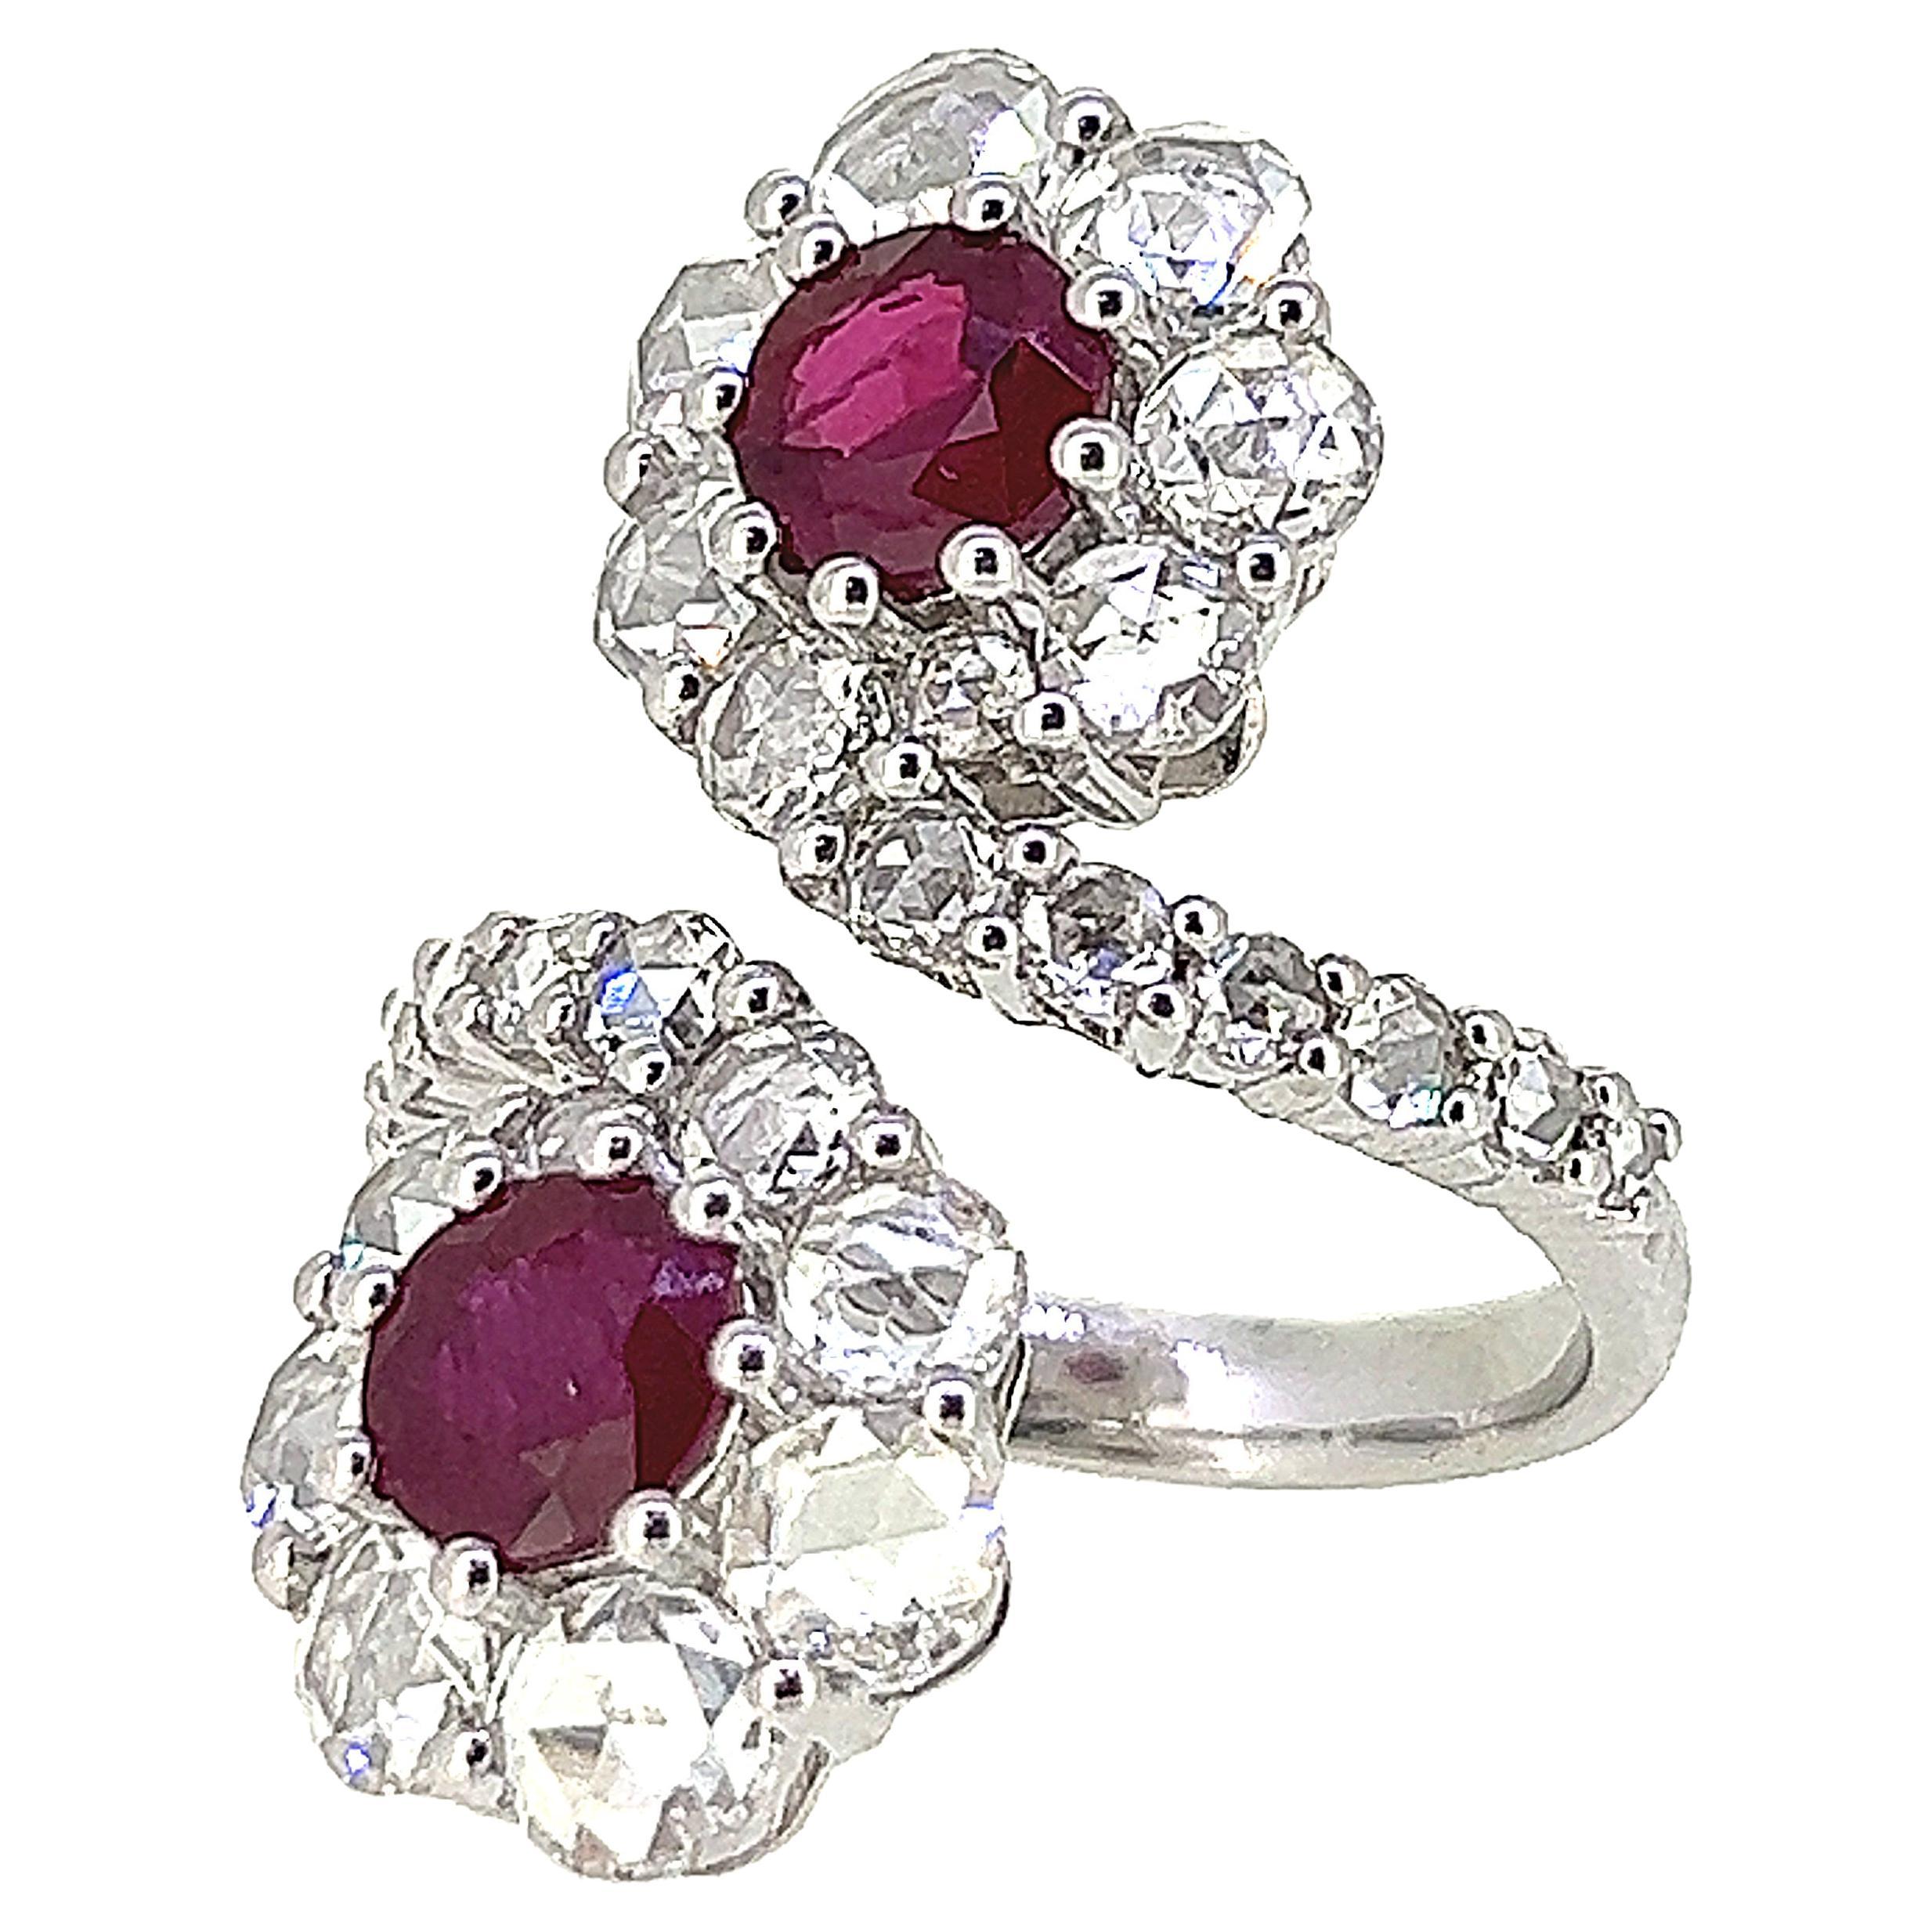 5.63 Carat Ruby and Diamond Double Flower Ring on 18K White Gold